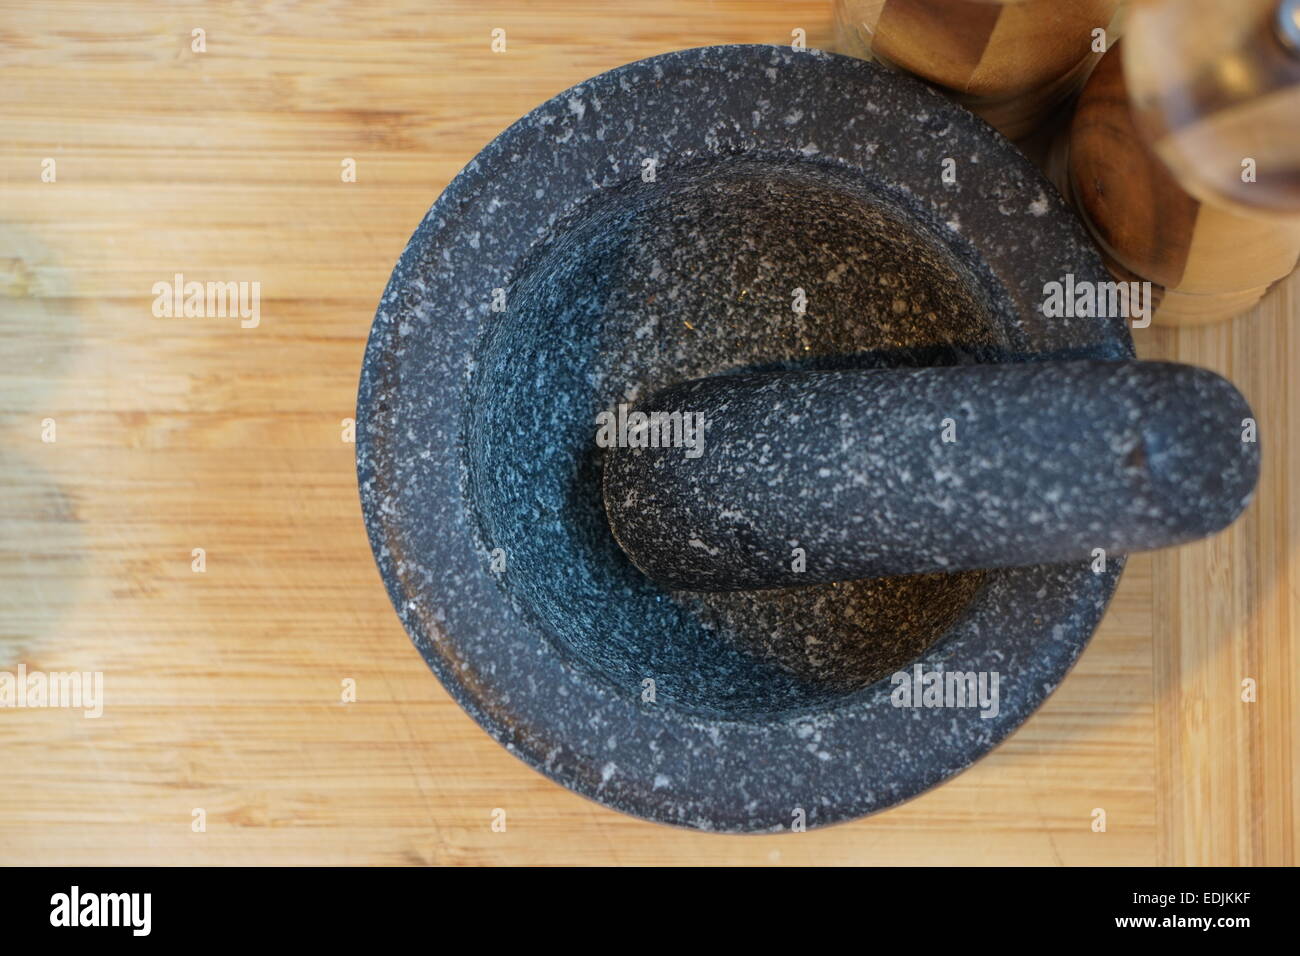 Mortar and pestle on wooden chopping board. Stock Photo